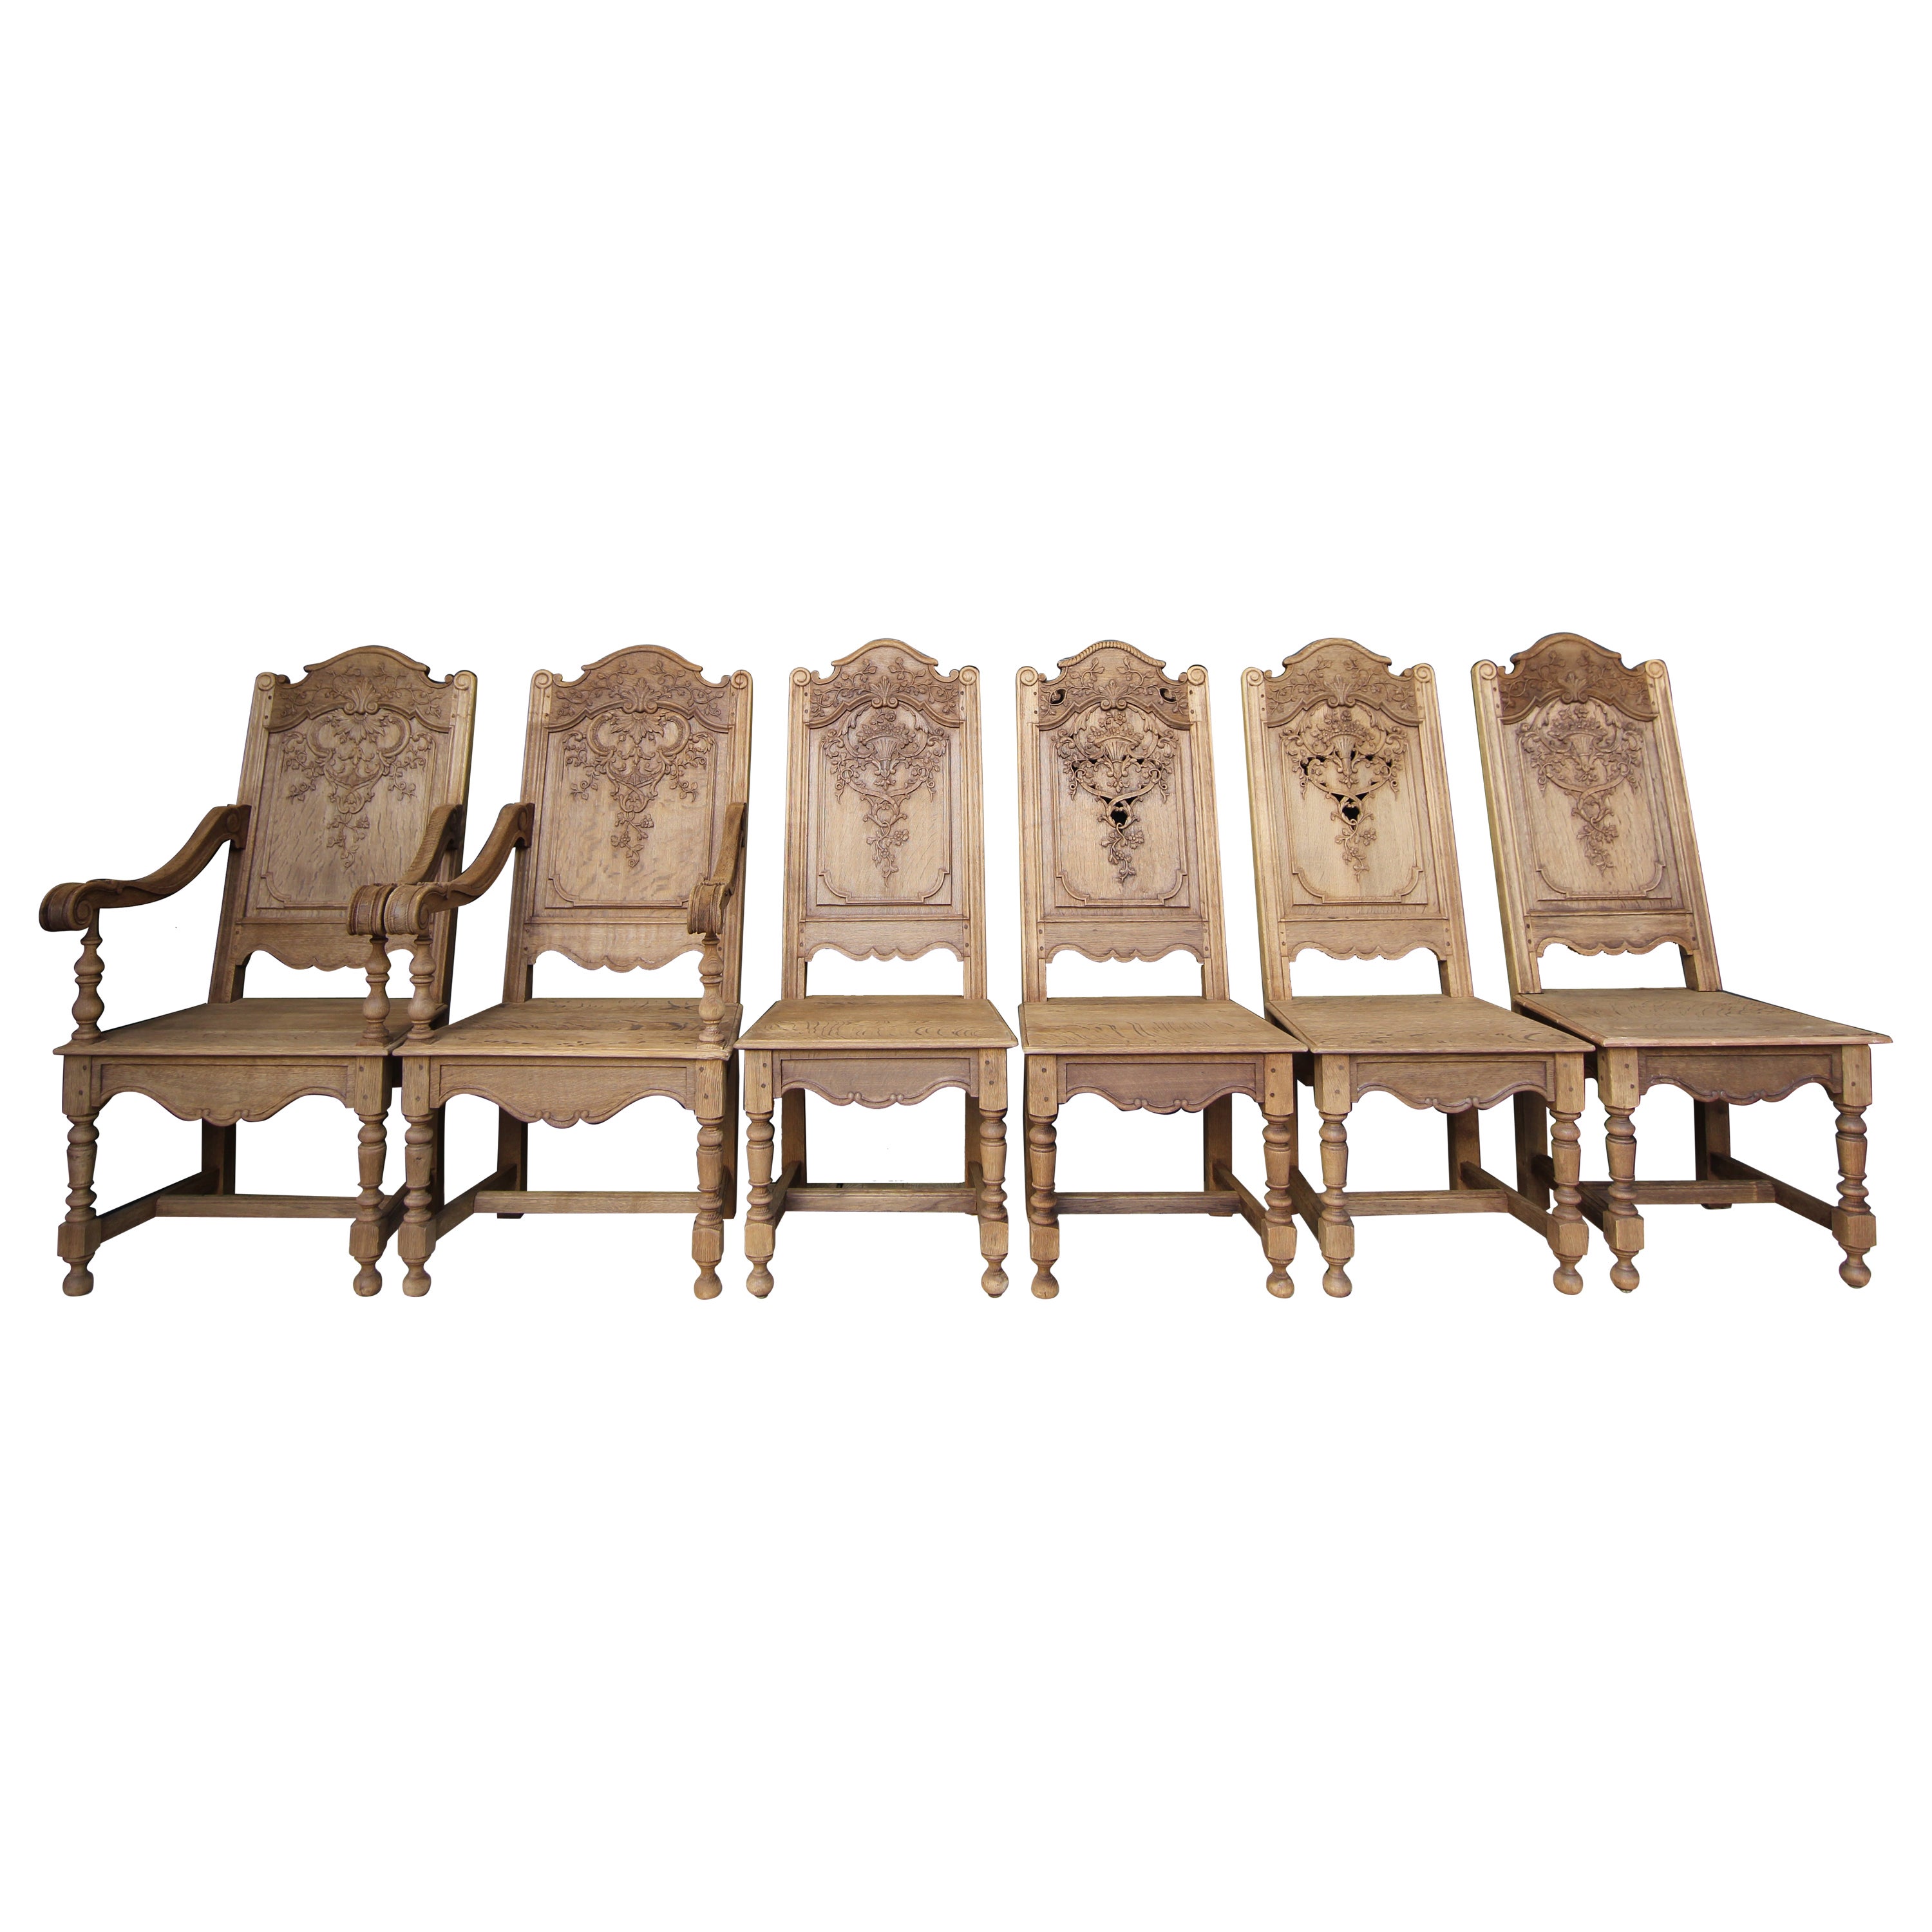 Early 20th Century Liégeoise Carved Stripped Oak Chairs, Set of 6